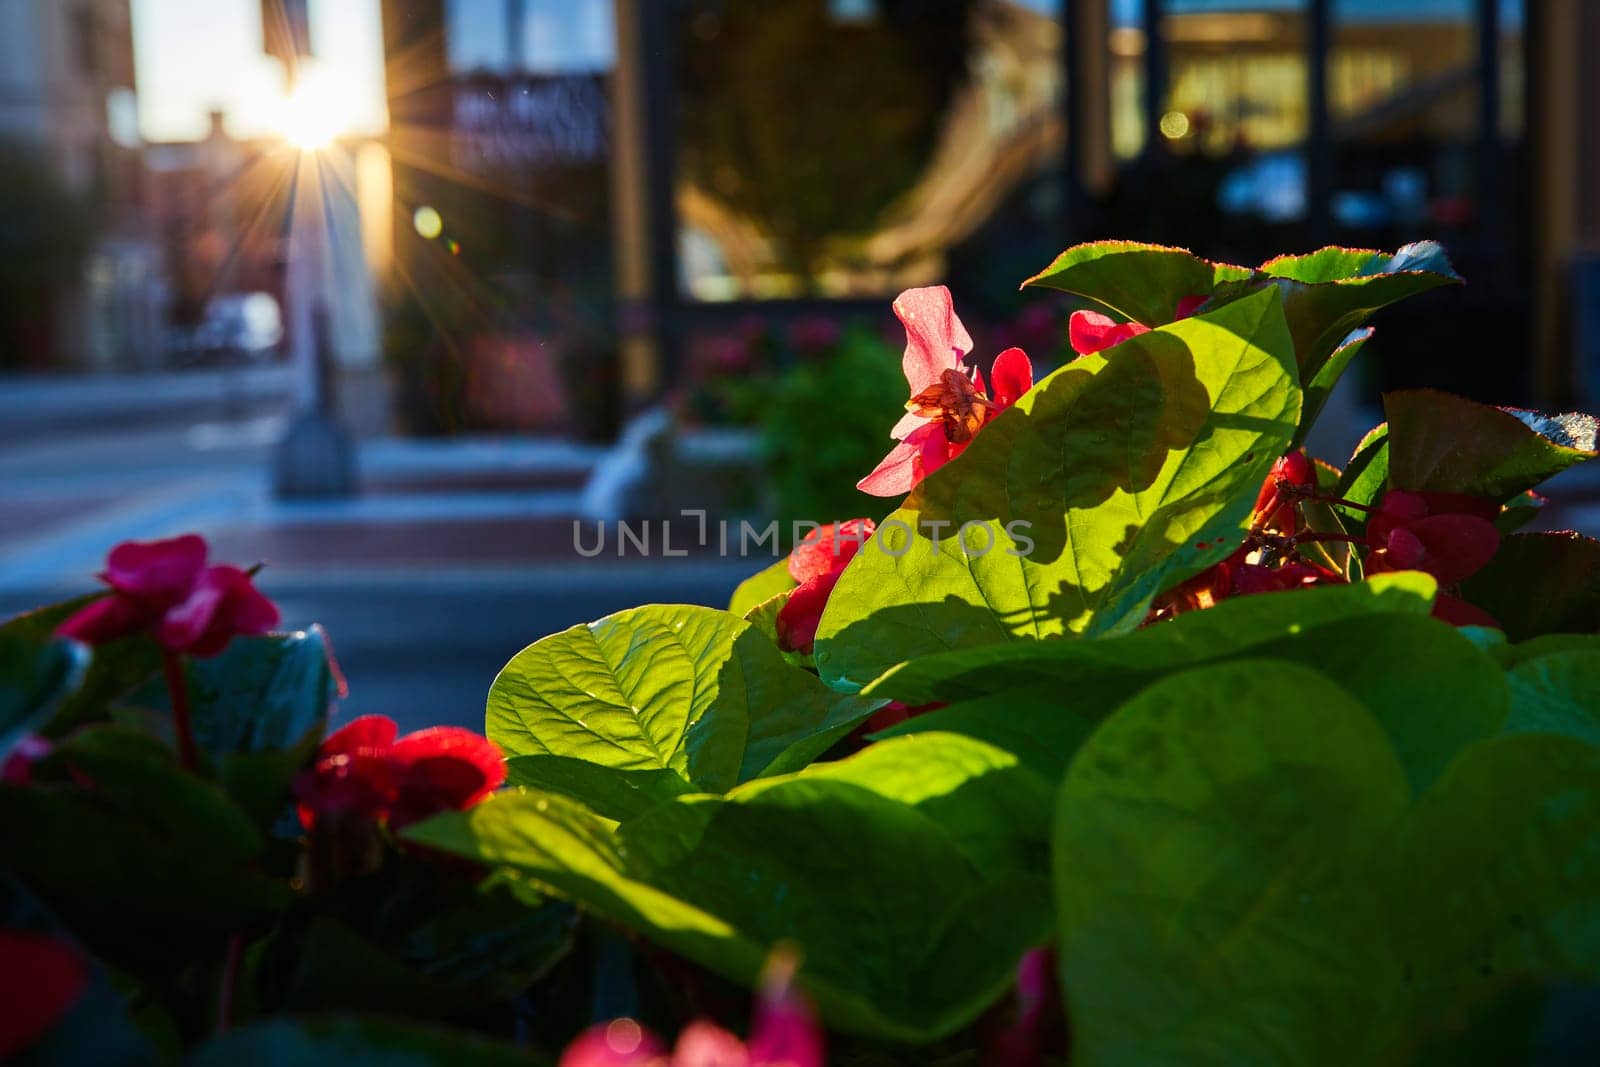 Early morning sunrise illuminates a vibrant urban garden in downtown Muncie, Indiana, highlighting the peaceful coexistence of nature and city life.